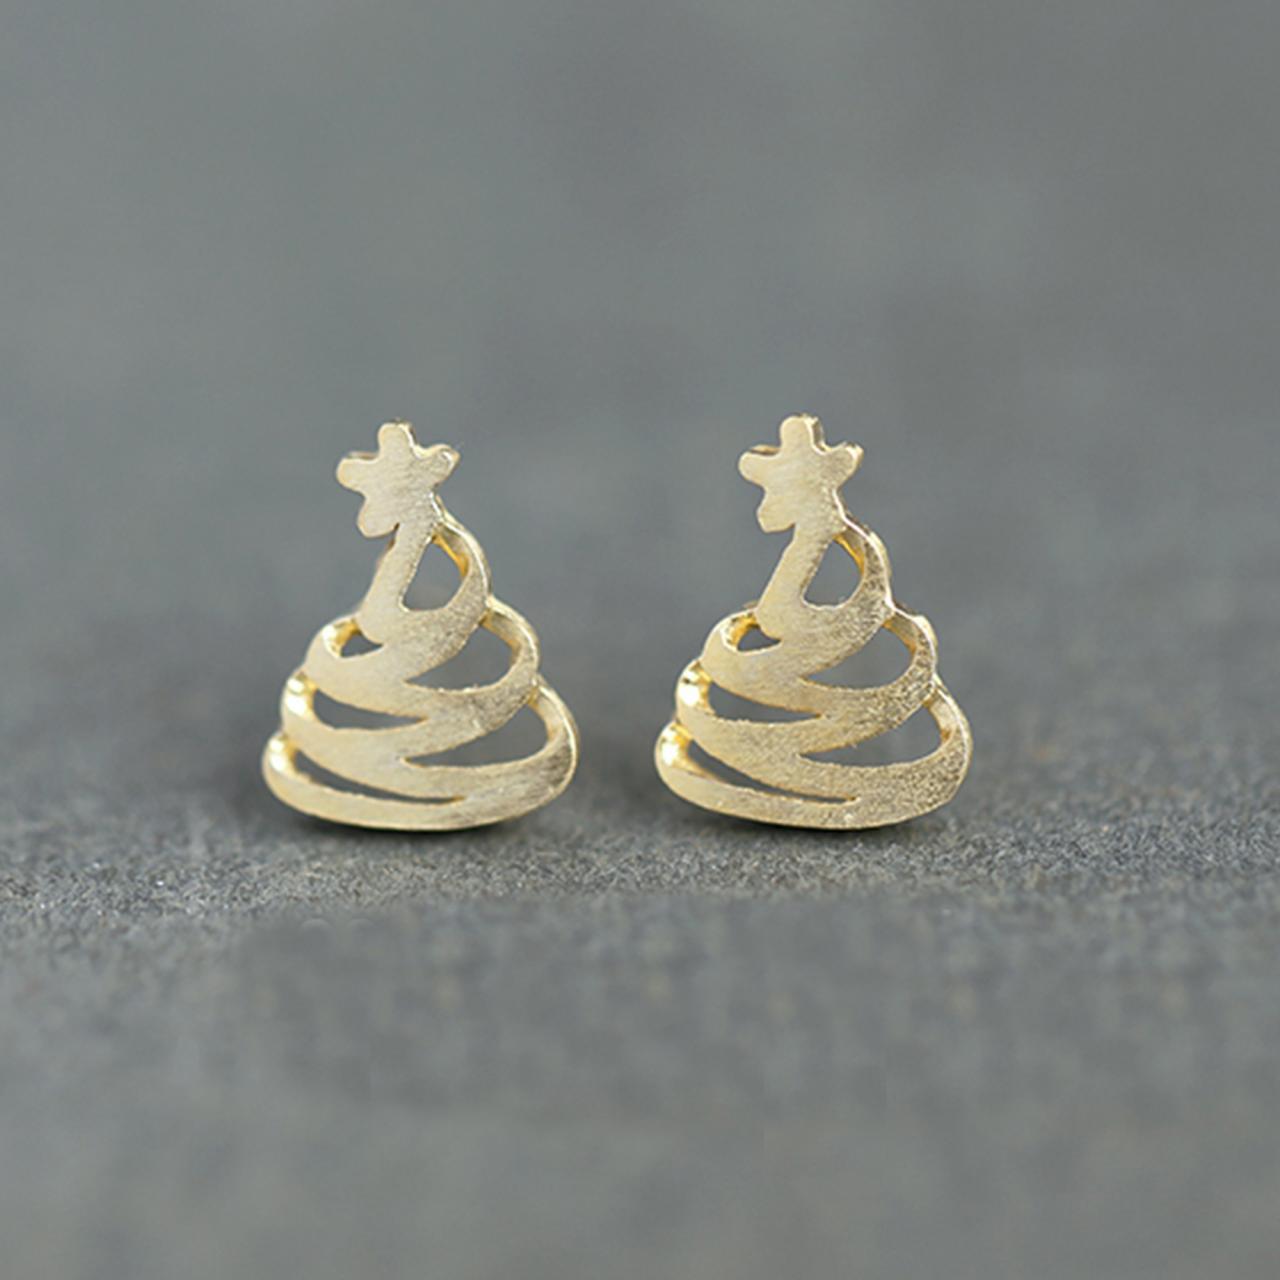 S925 Sterling Silver Christmas Tree Ear Studs, Christmas Tree Earrings, Filigree Ear Studs, Christmas Tree Earring Posts, Christmas Tree Ear Stud